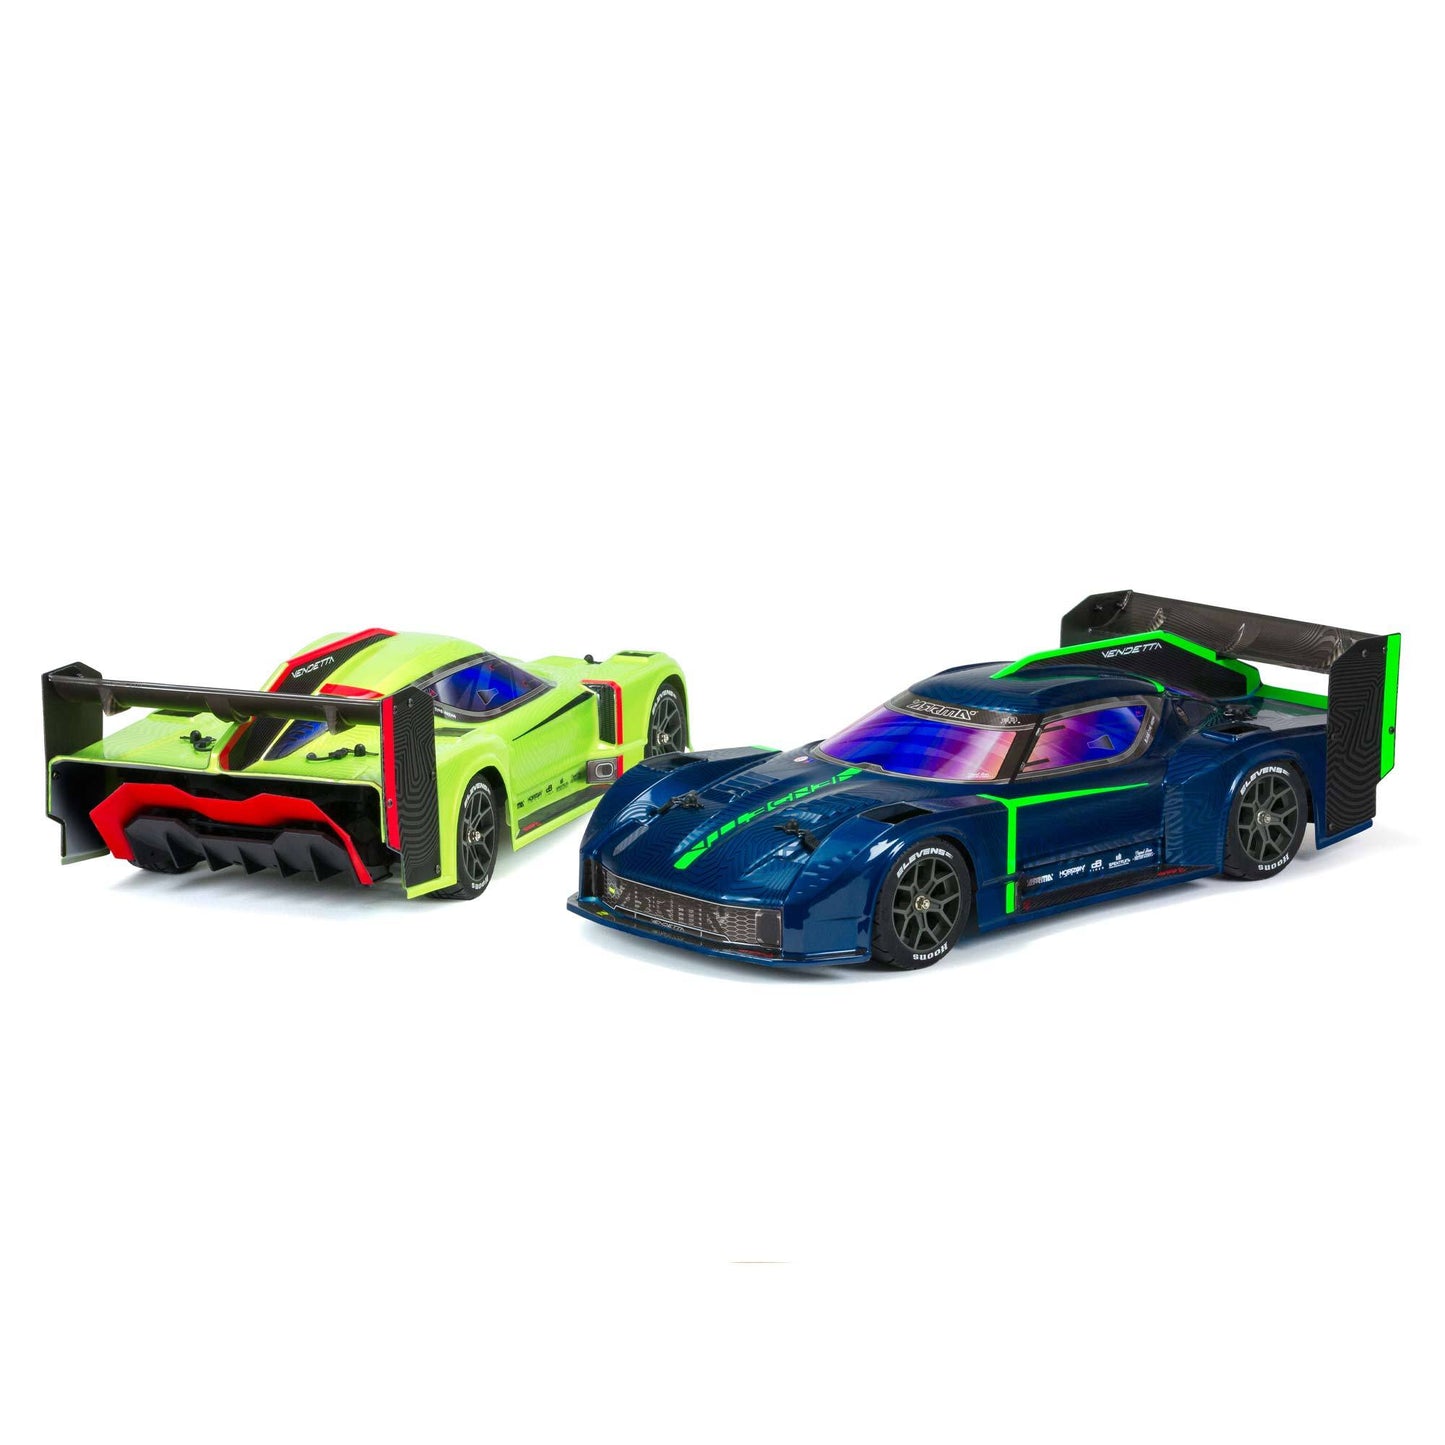 1/8 VENDETTA 4X4 3S BLX Brushless All-Road Speed Bash Racer Green - Dirt Cheap RC SAVING YOU MONEY, ONE PART AT A TIME